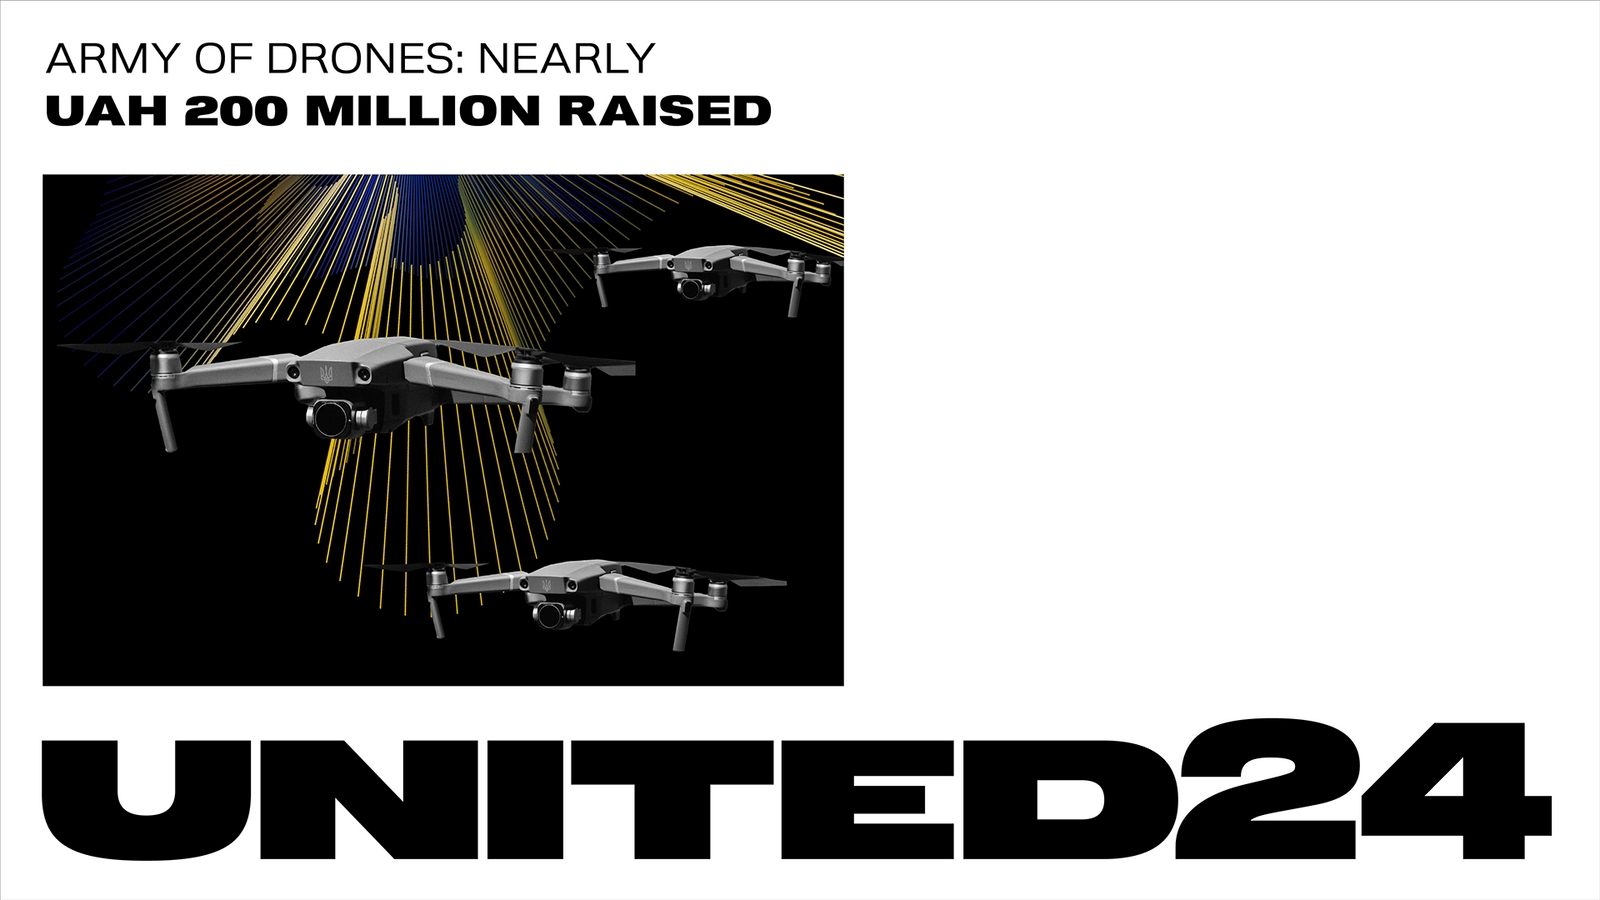 Nearly UAH 200 Million Was Raised in the First 3 Days of the Army of Drones Fundraiser